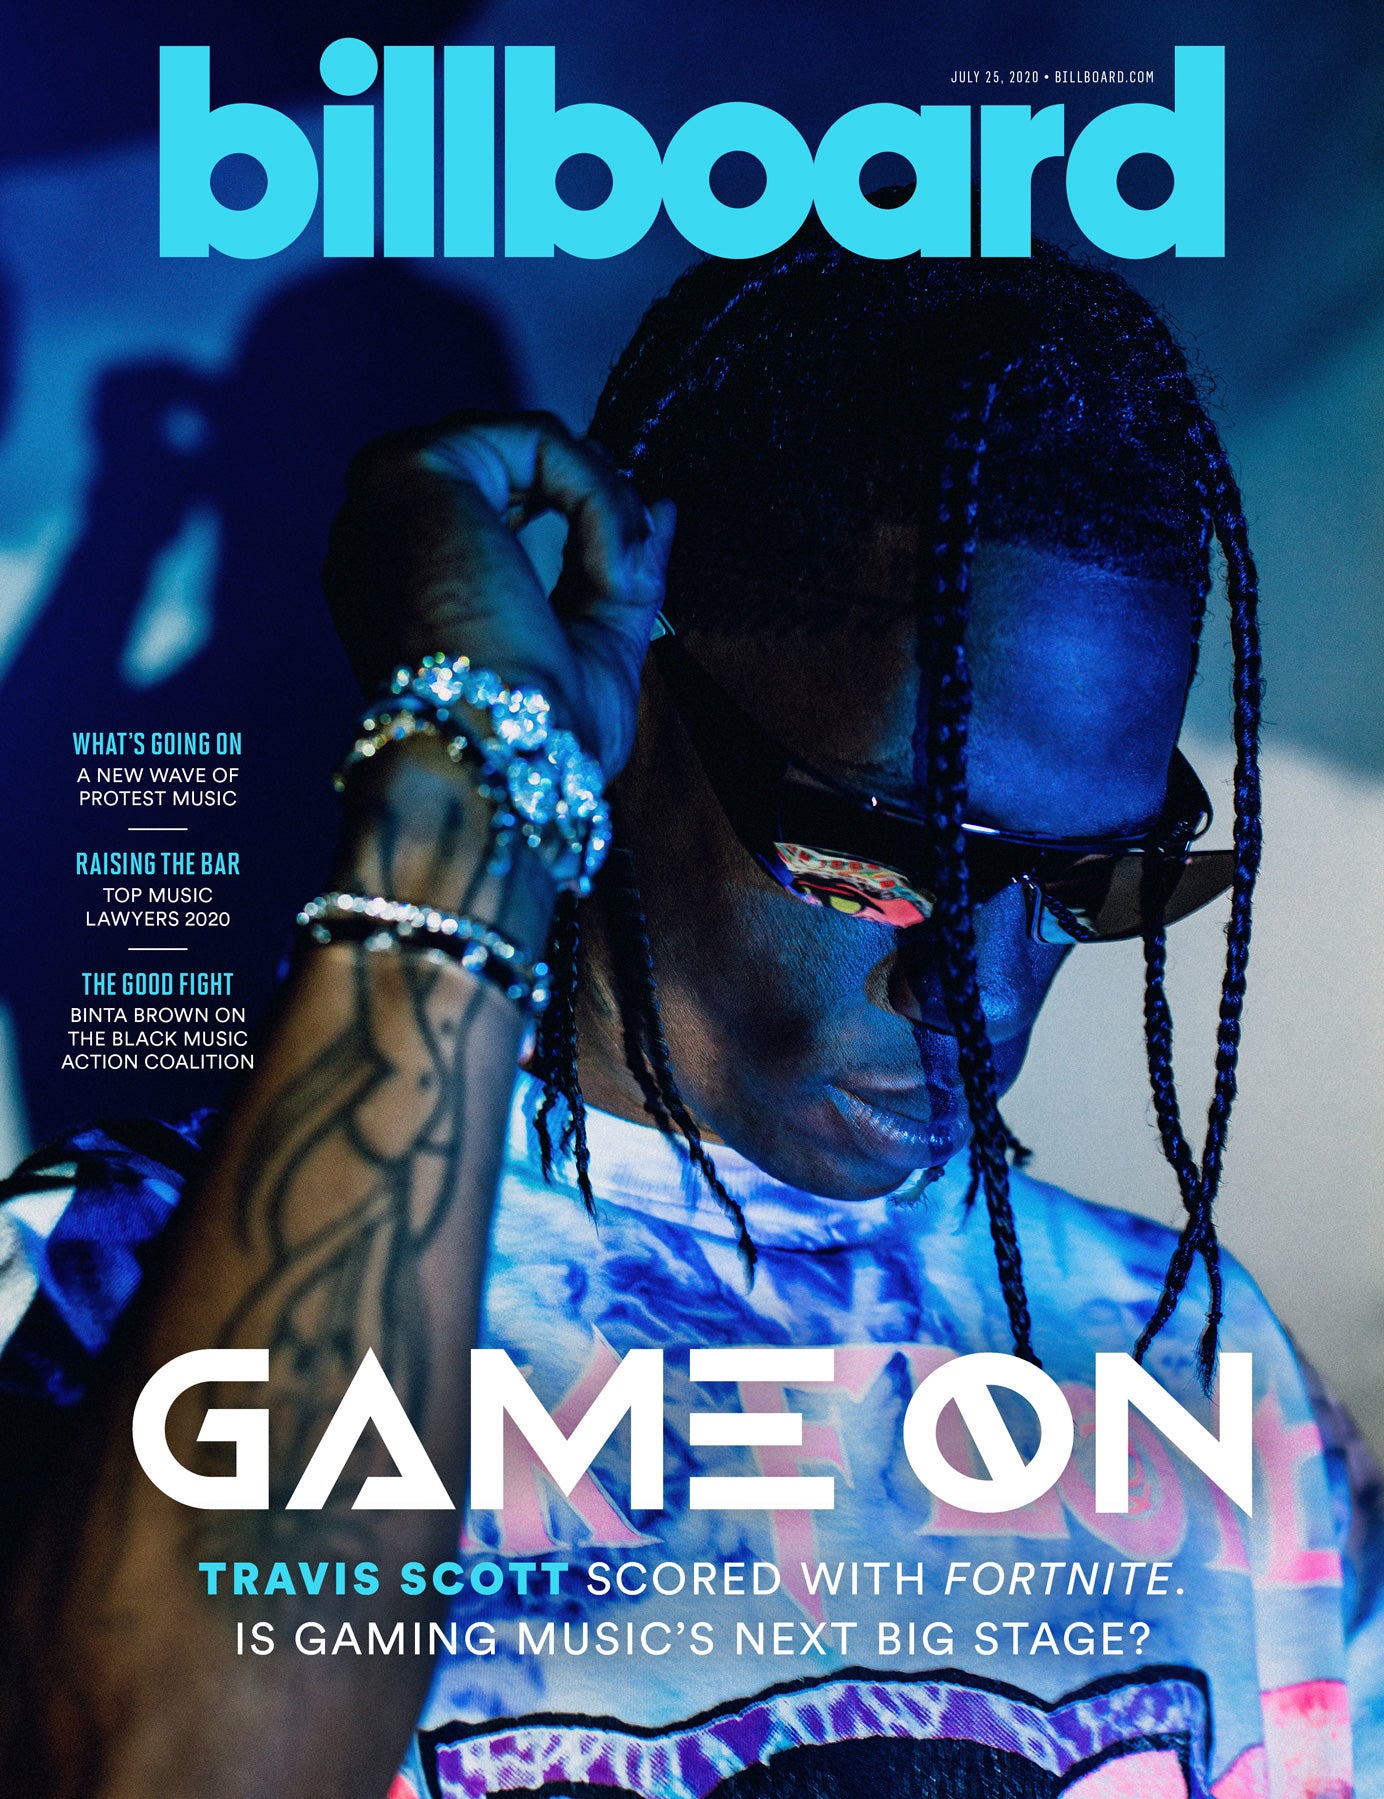 SPOTTED: Travis Scott on the Latest Billboard Cover